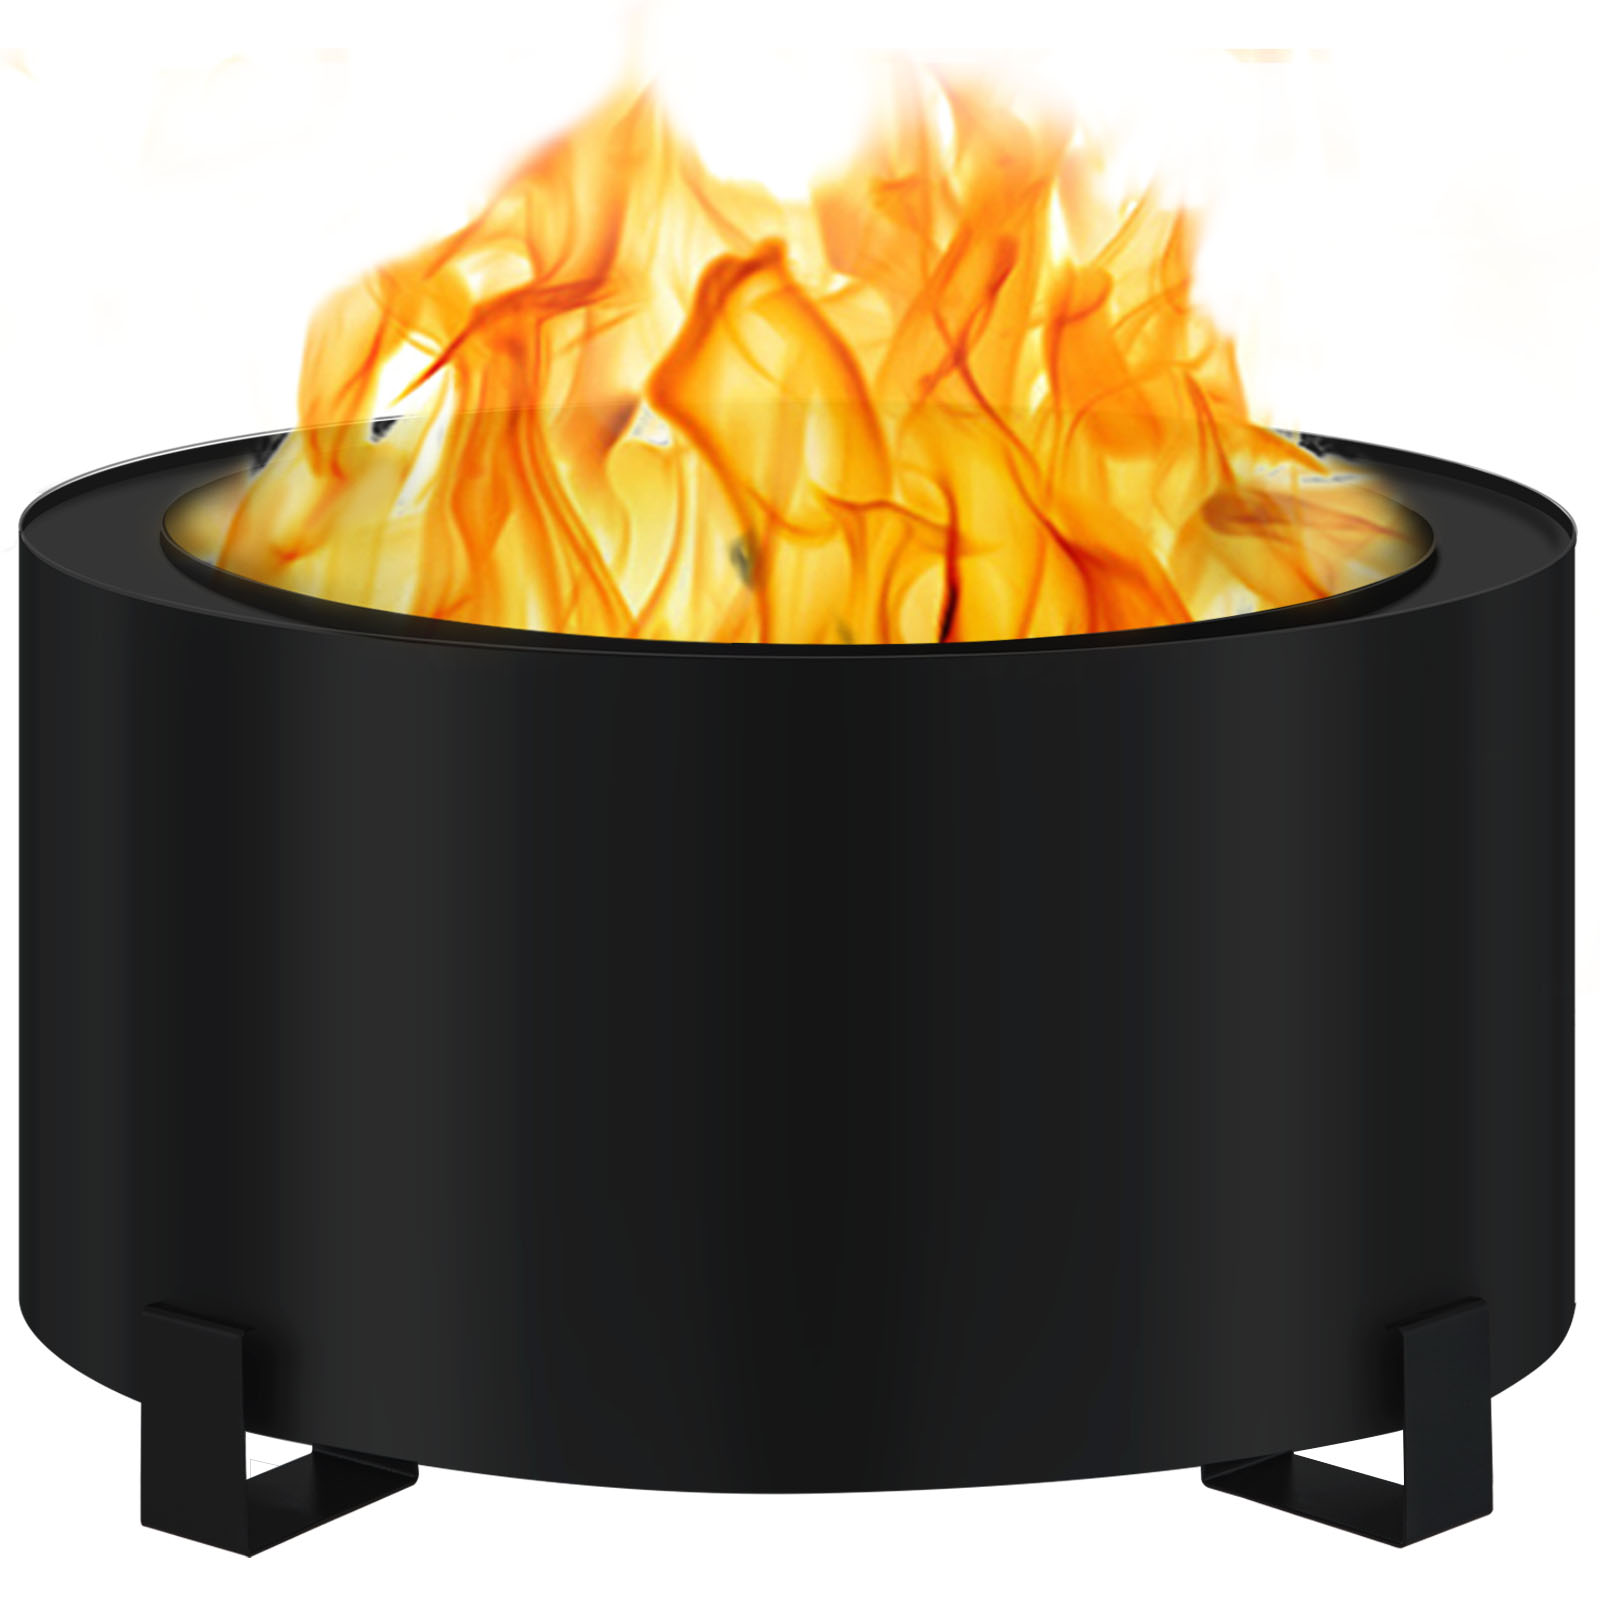 Outdoor Stove Bonfire Fire Pit Portable Smokeless Fire Bowl for Picnic Camping Backyard Large 13.5 inch Diameter Wood Burning Fire Pit VEVOR Smokeless Fire Pit Black Carbon Steel Stove Bonfire 